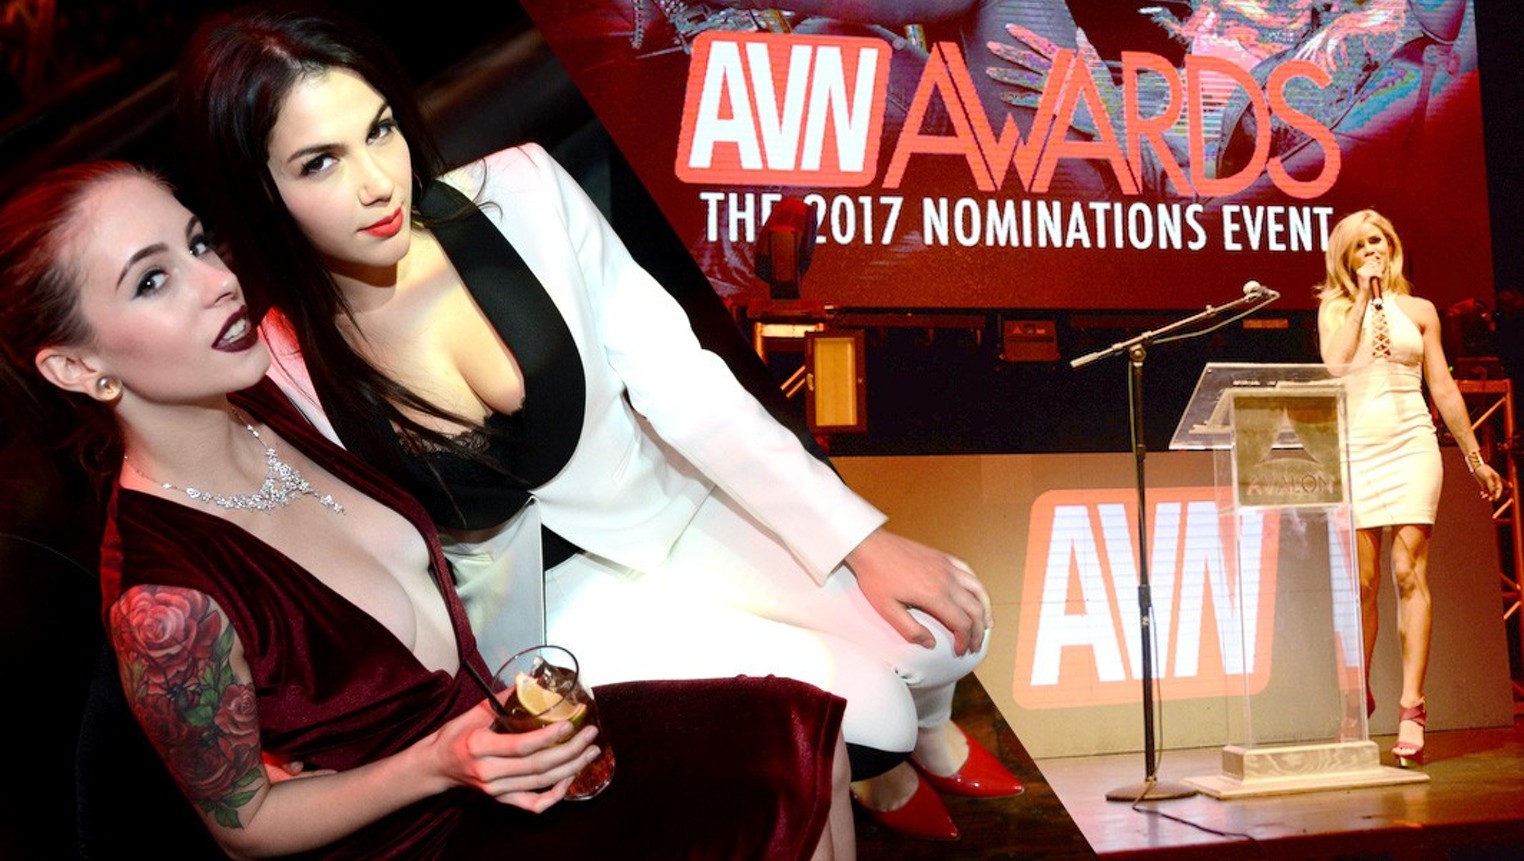 1524px x 861px - Porn Stars Flash the Camera at AVN Nominations Party (NSFW) | Denver |  Denver Westword | The Leading Independent News Source in Denver, Colorado